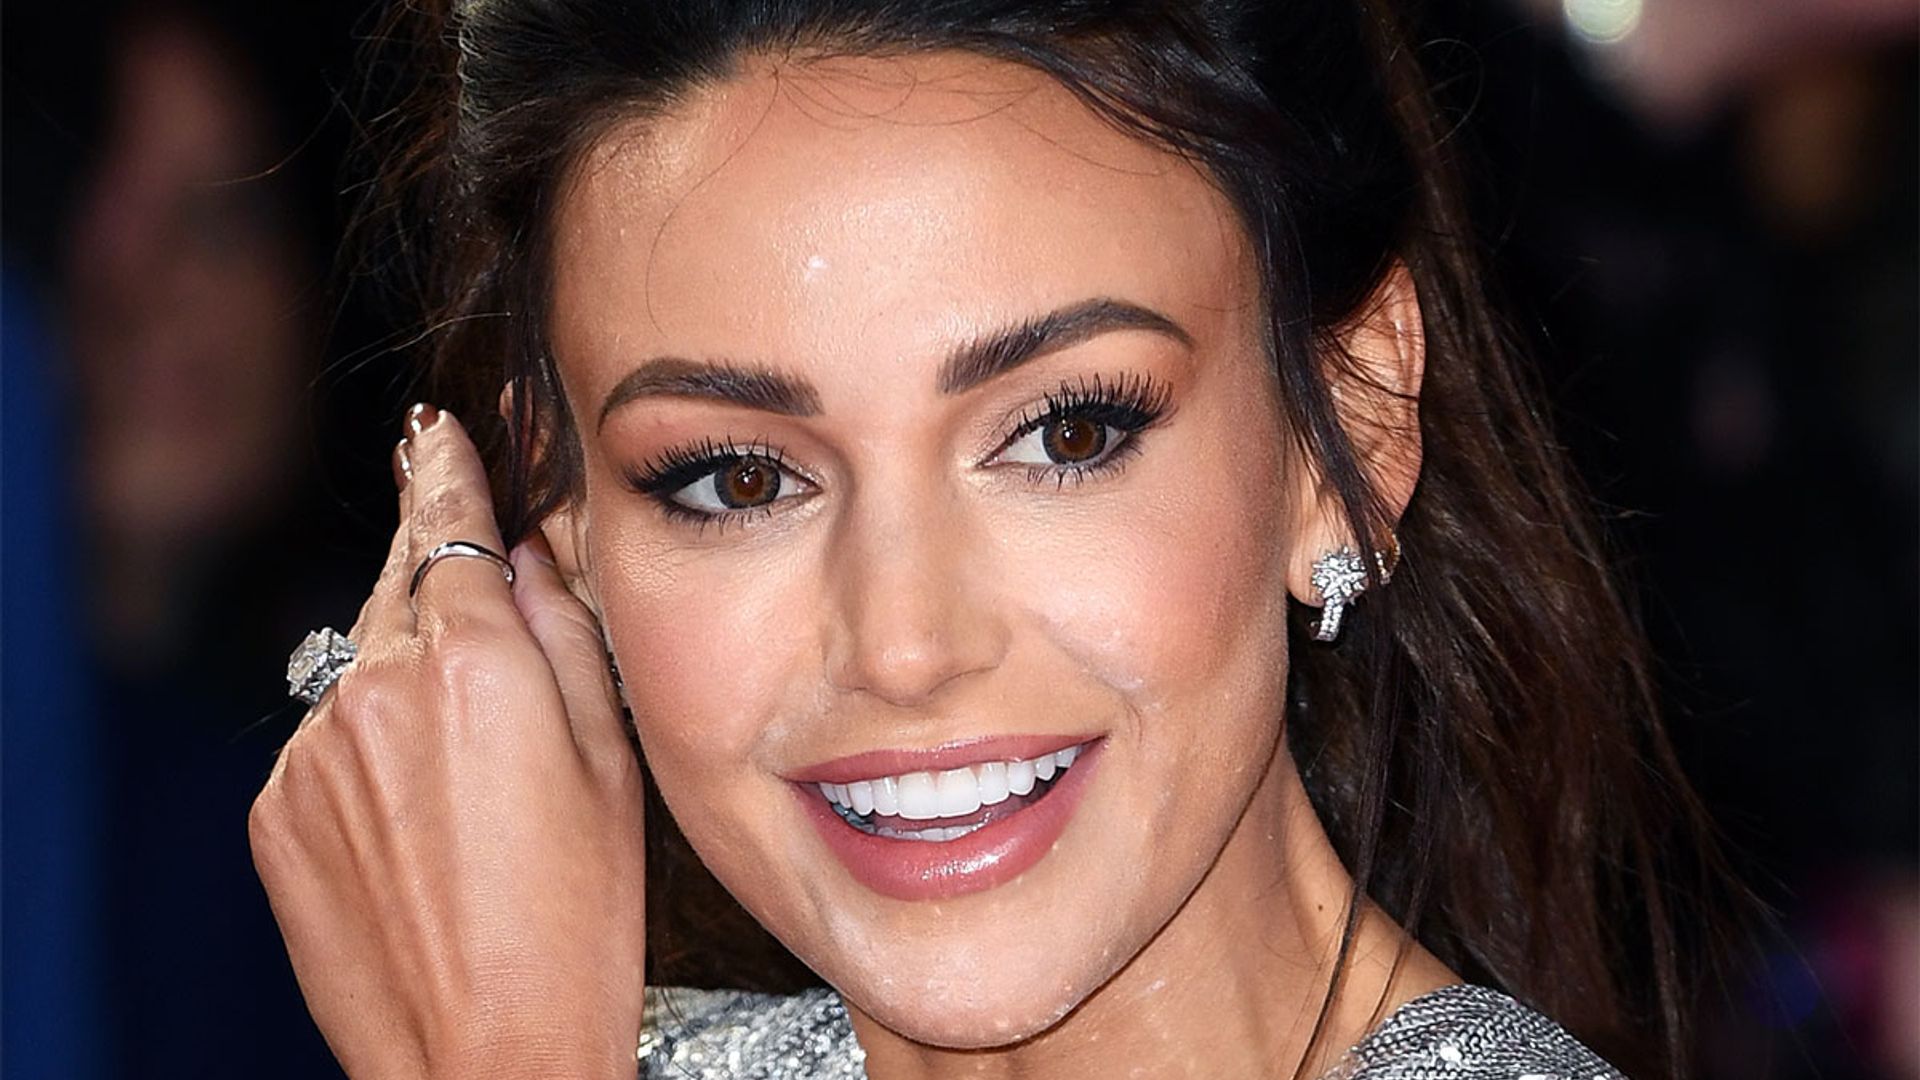 Michelle Keegan swears by this brow serum - and you need it ASAP